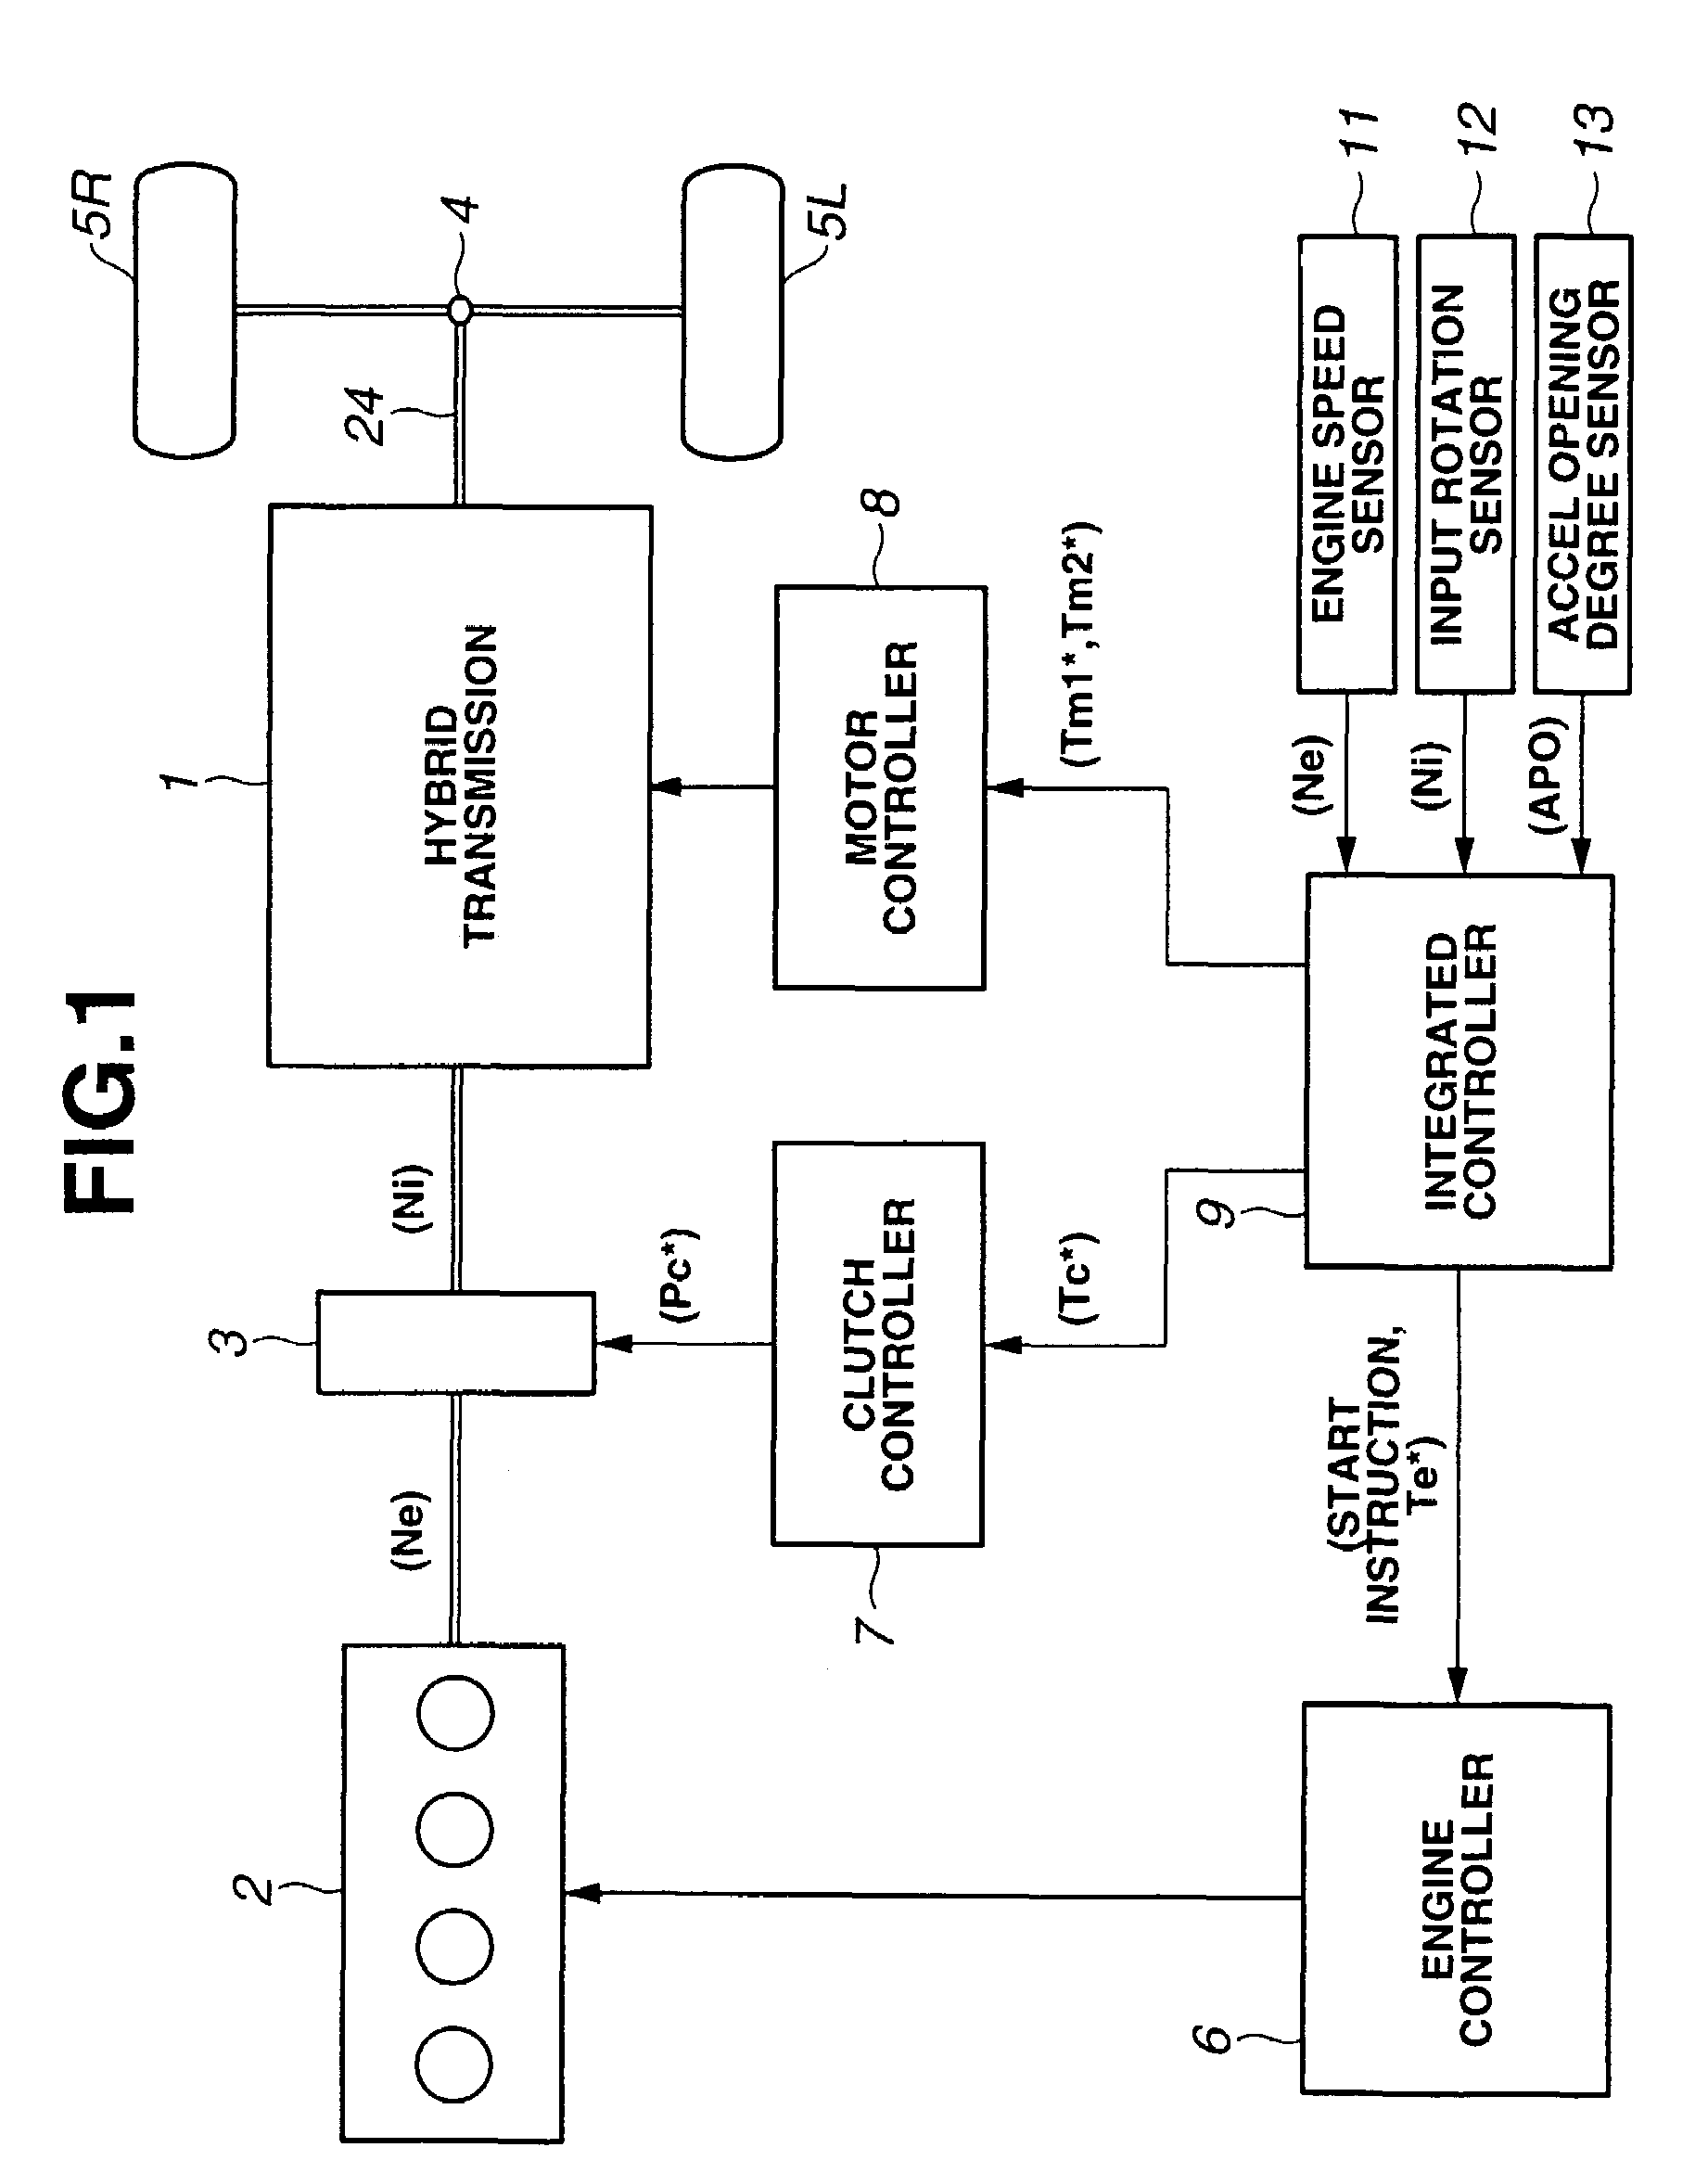 Method for starting engine of vehicle with hybrid transmission and apparatus for carrying out the method